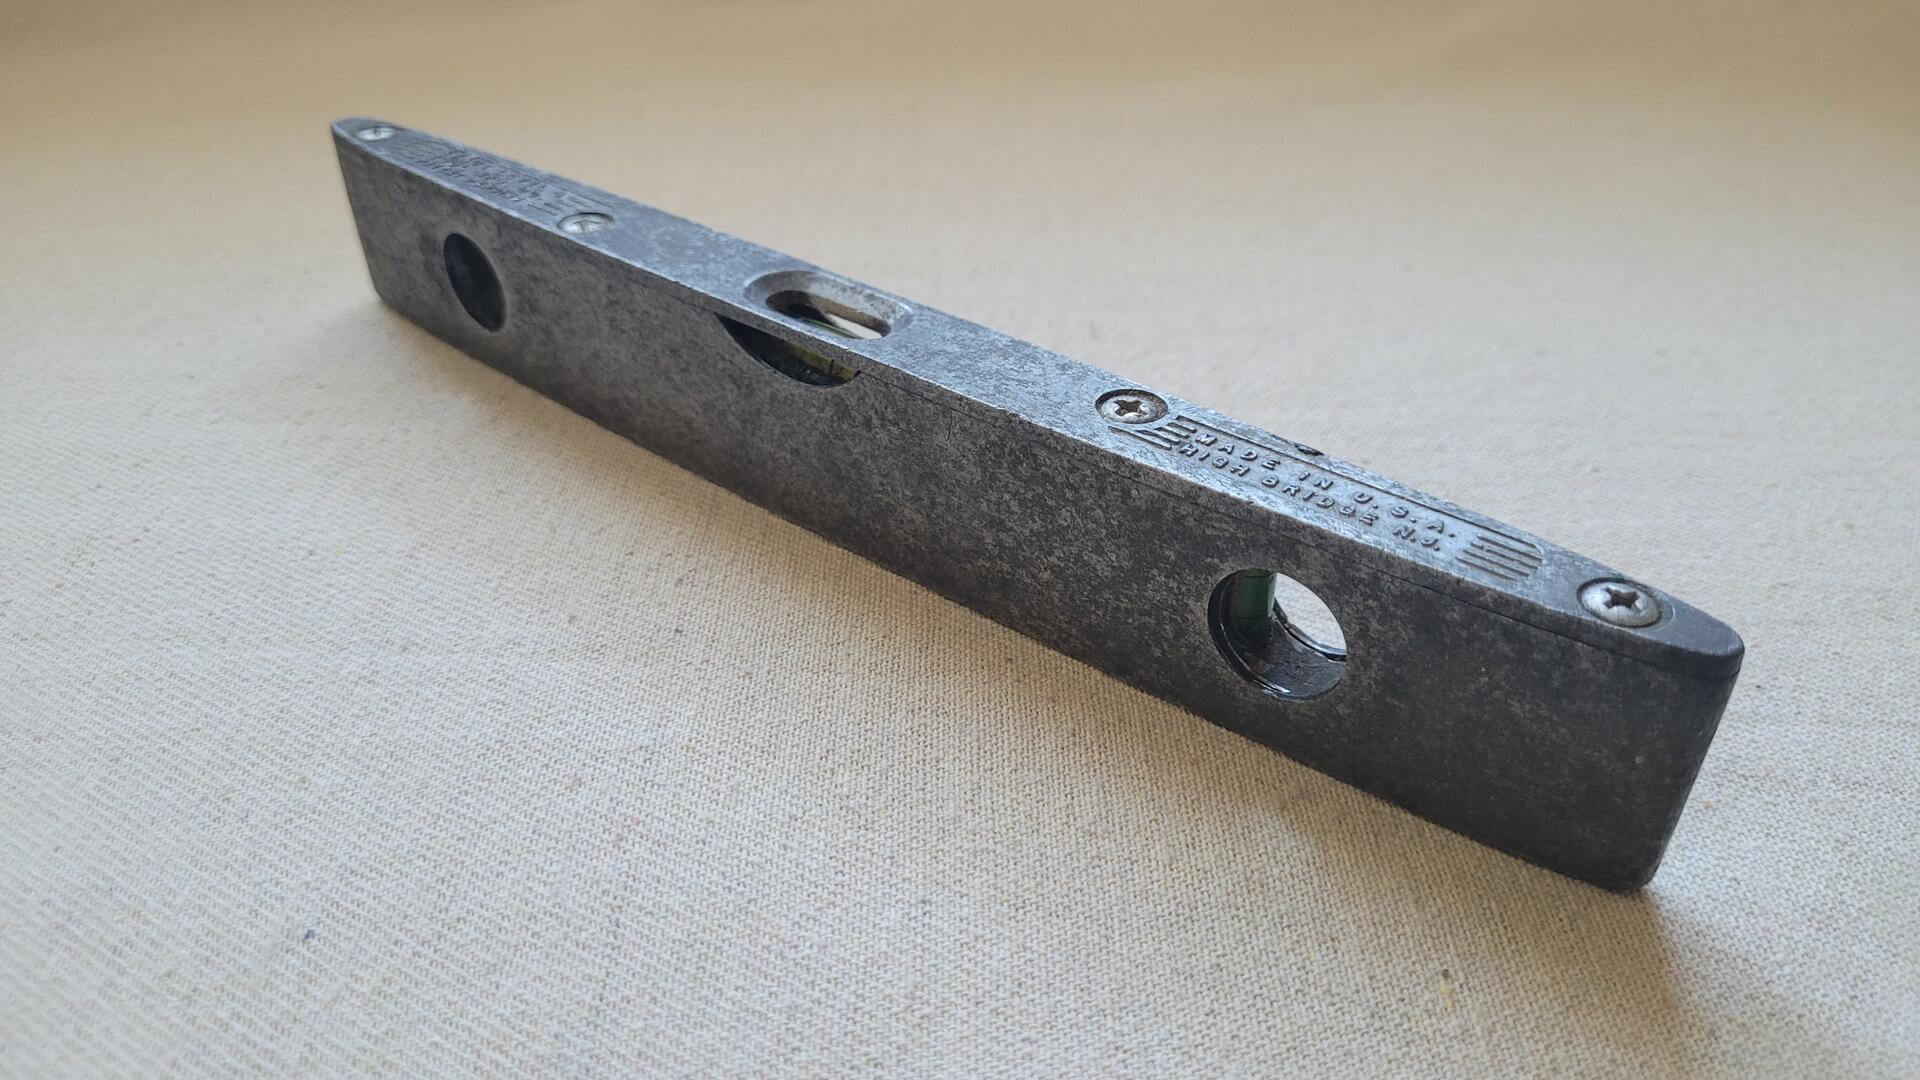 exact-level-tool-manufacturing-company-cast-aluminum-torpedo-level-high-bridge-nj-vintage-antique-made-in-usa-collectible-marking-measuring-tools